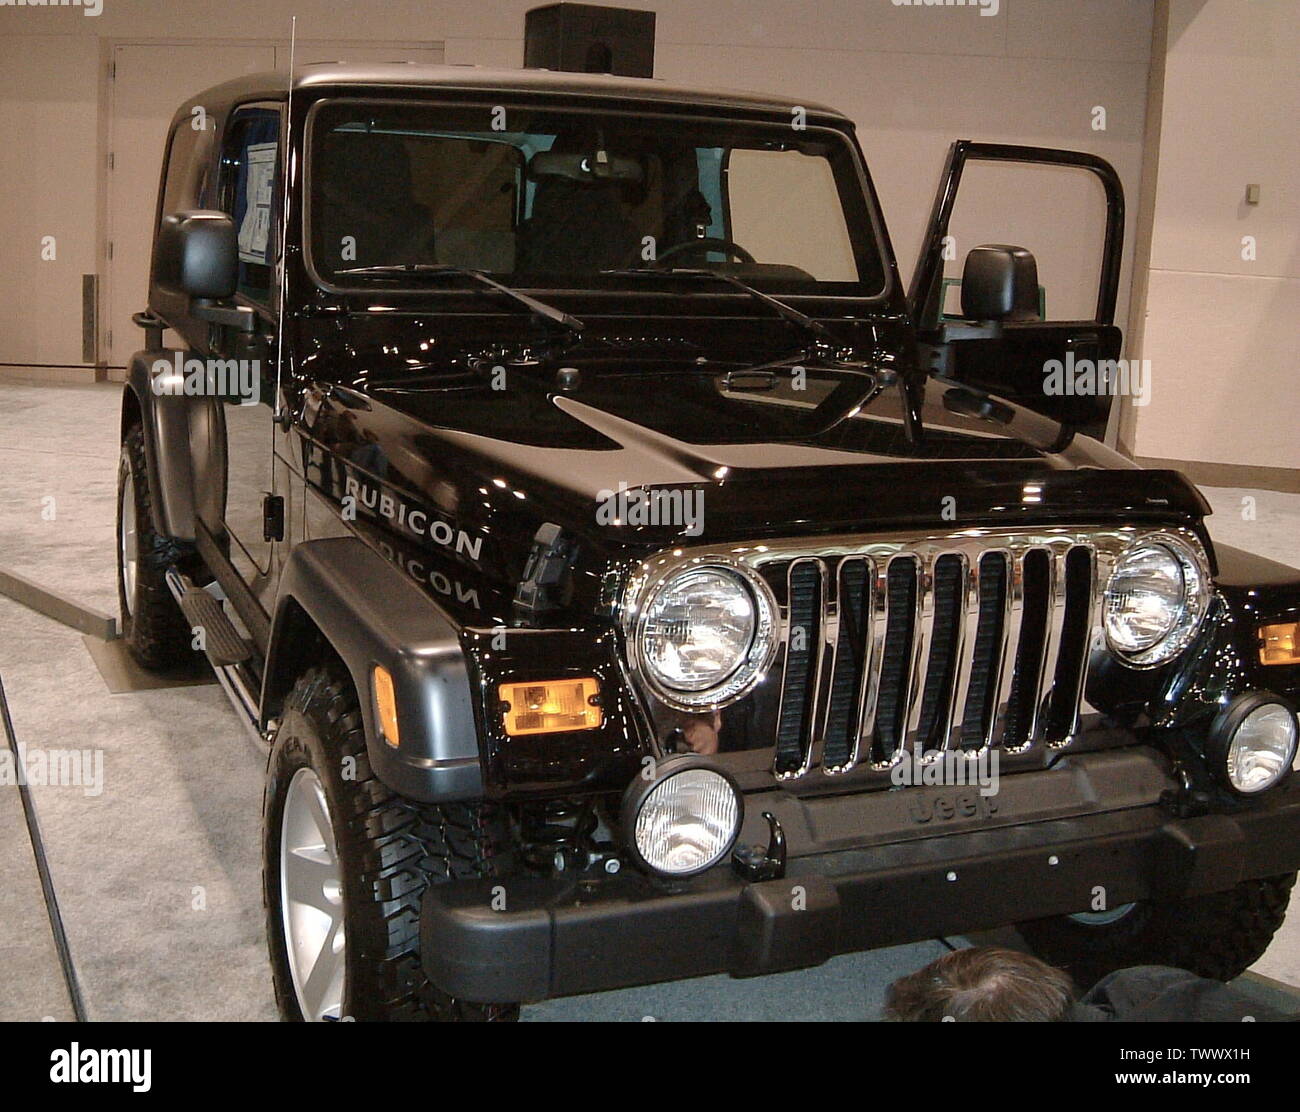 jeep wrangler rubicon; 13 March 2007 (original upload date); Transferred  from  to Commons by SpyderMonkey using CommonsHelper.; Pluik at  English pedia Stock Photo - Alamy